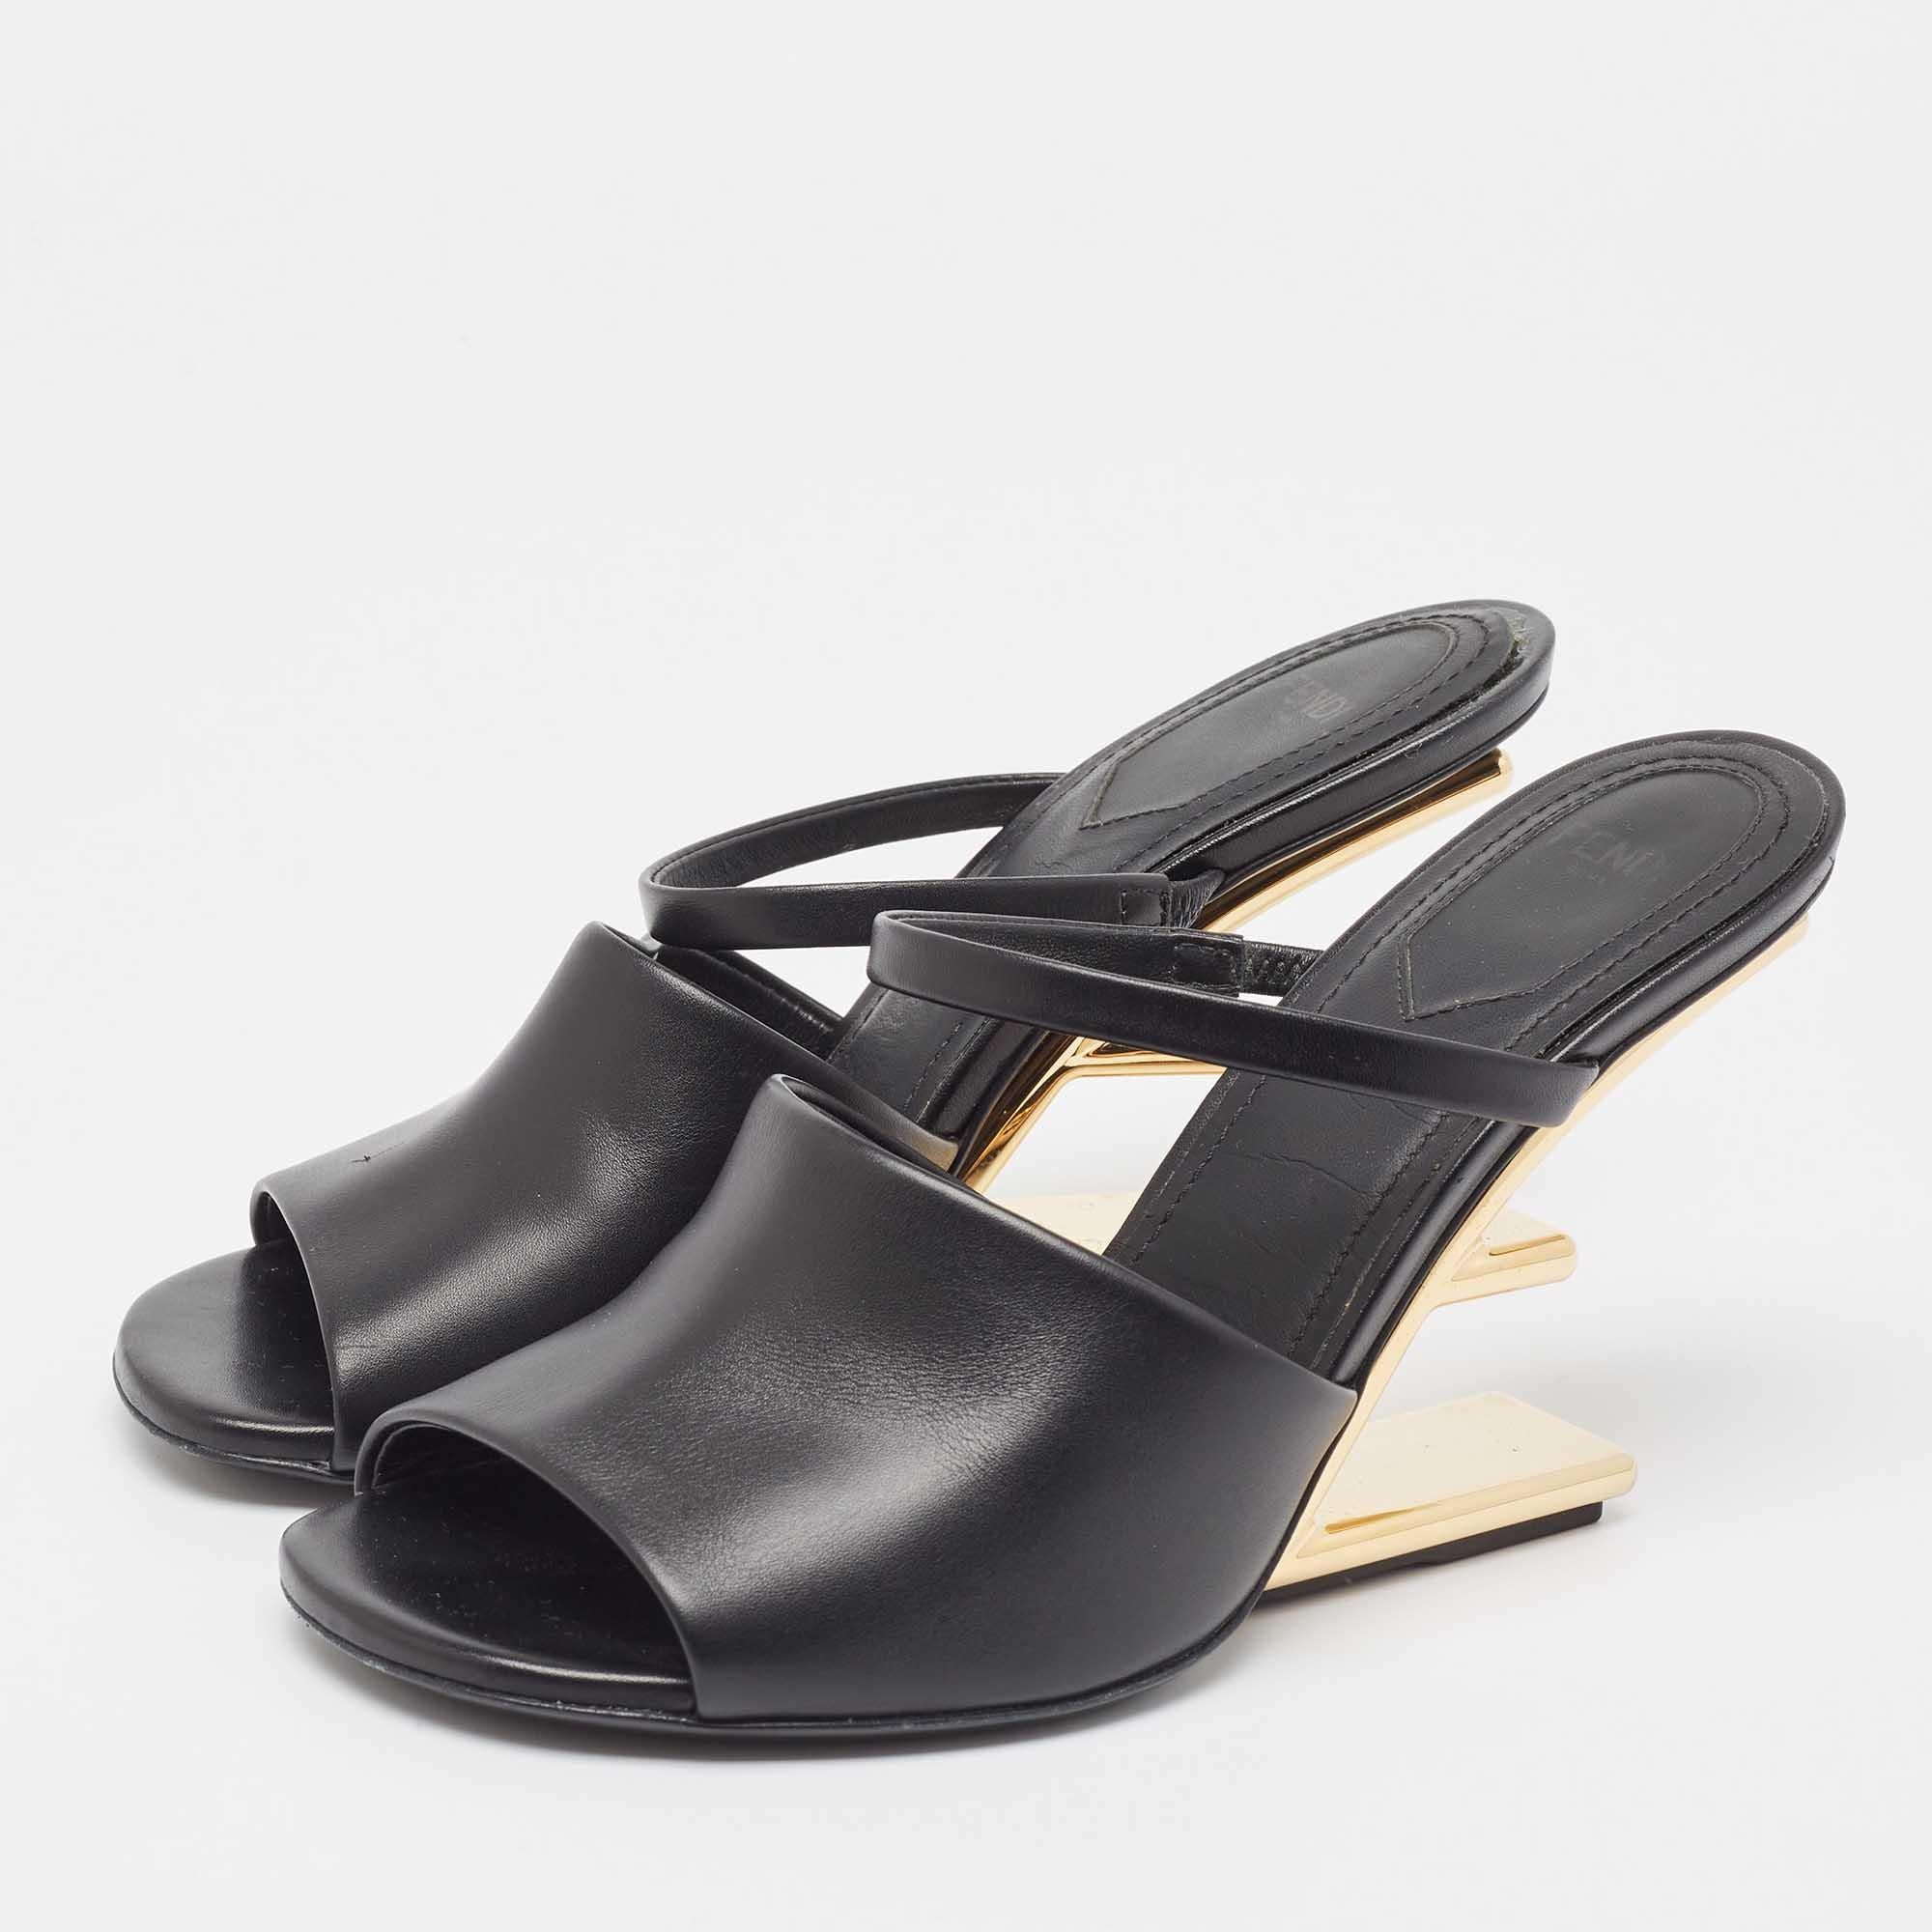 Crafted from exquisite black leather, these sandals exude sophistication and elegance. The iconic Fendi logo is carved into heels, showcasing the brand's renowned style. With a comfortable slip-on design and a sleek silhouette, these sandals are the